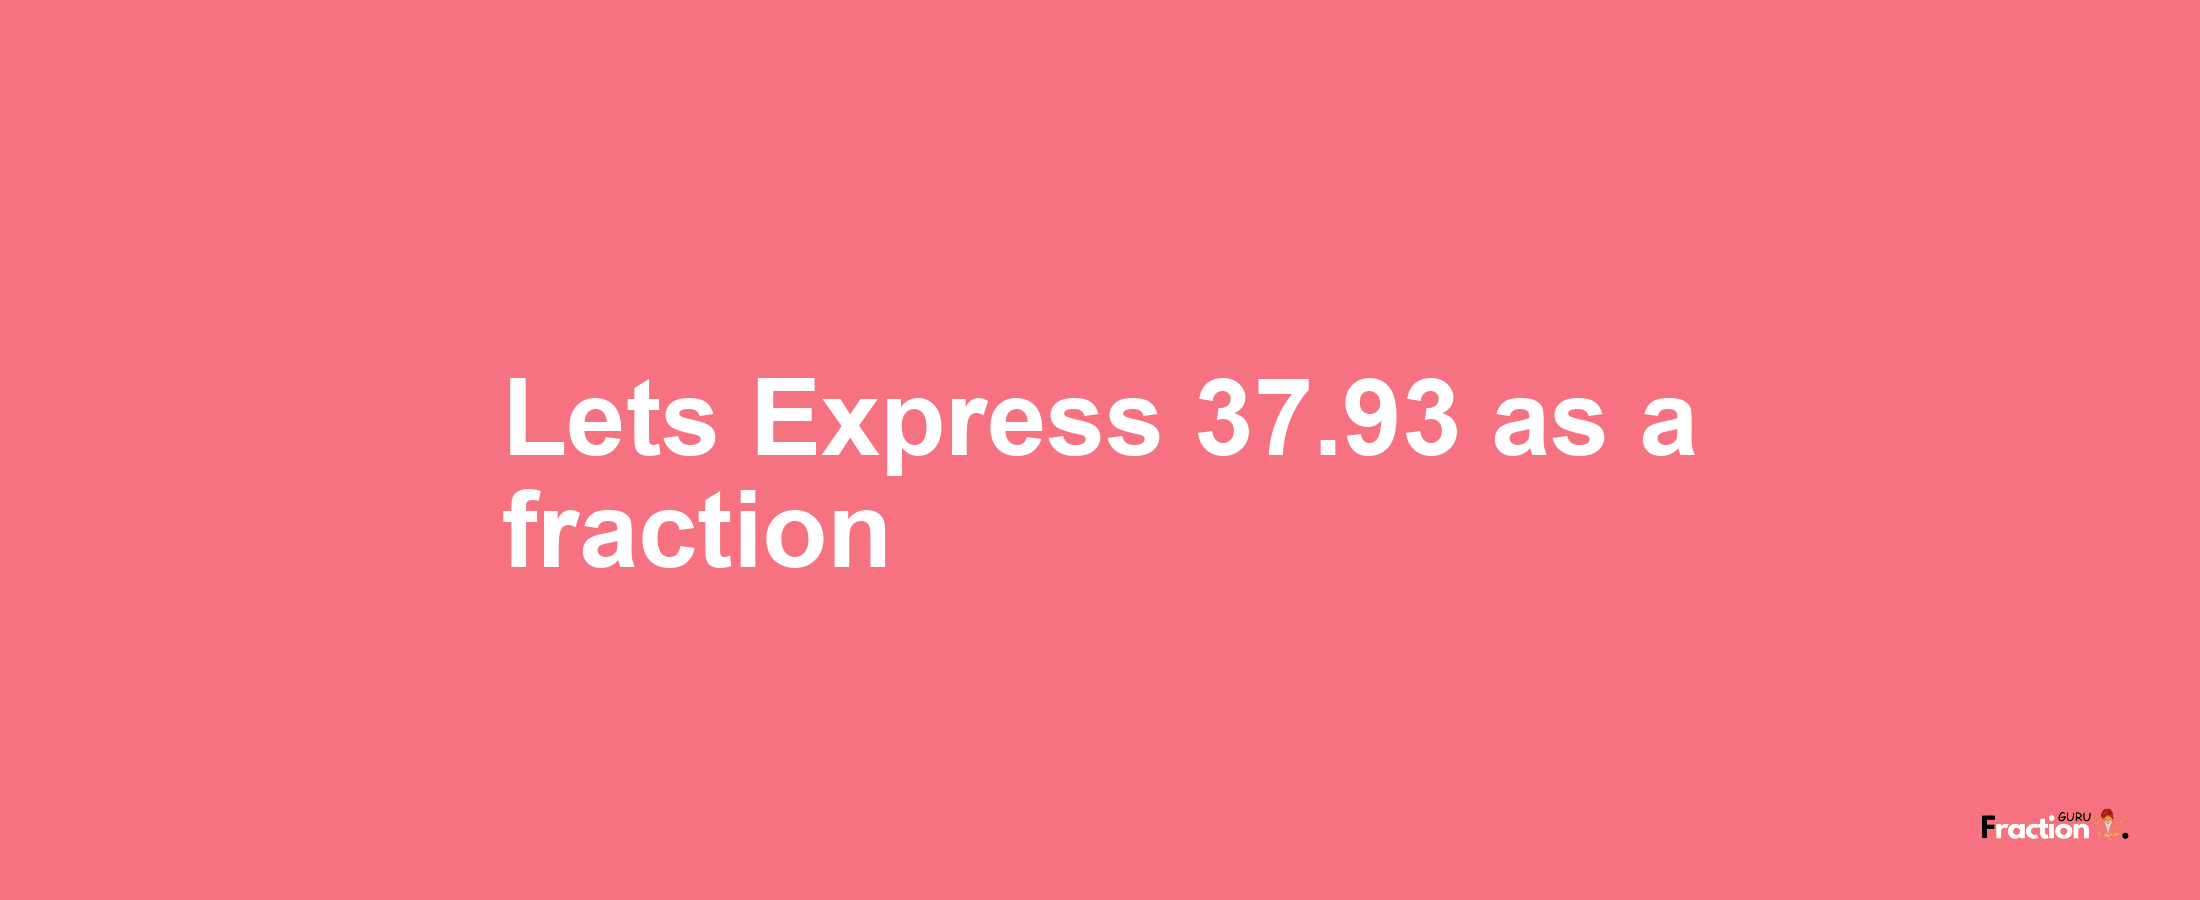 Lets Express 37.93 as afraction